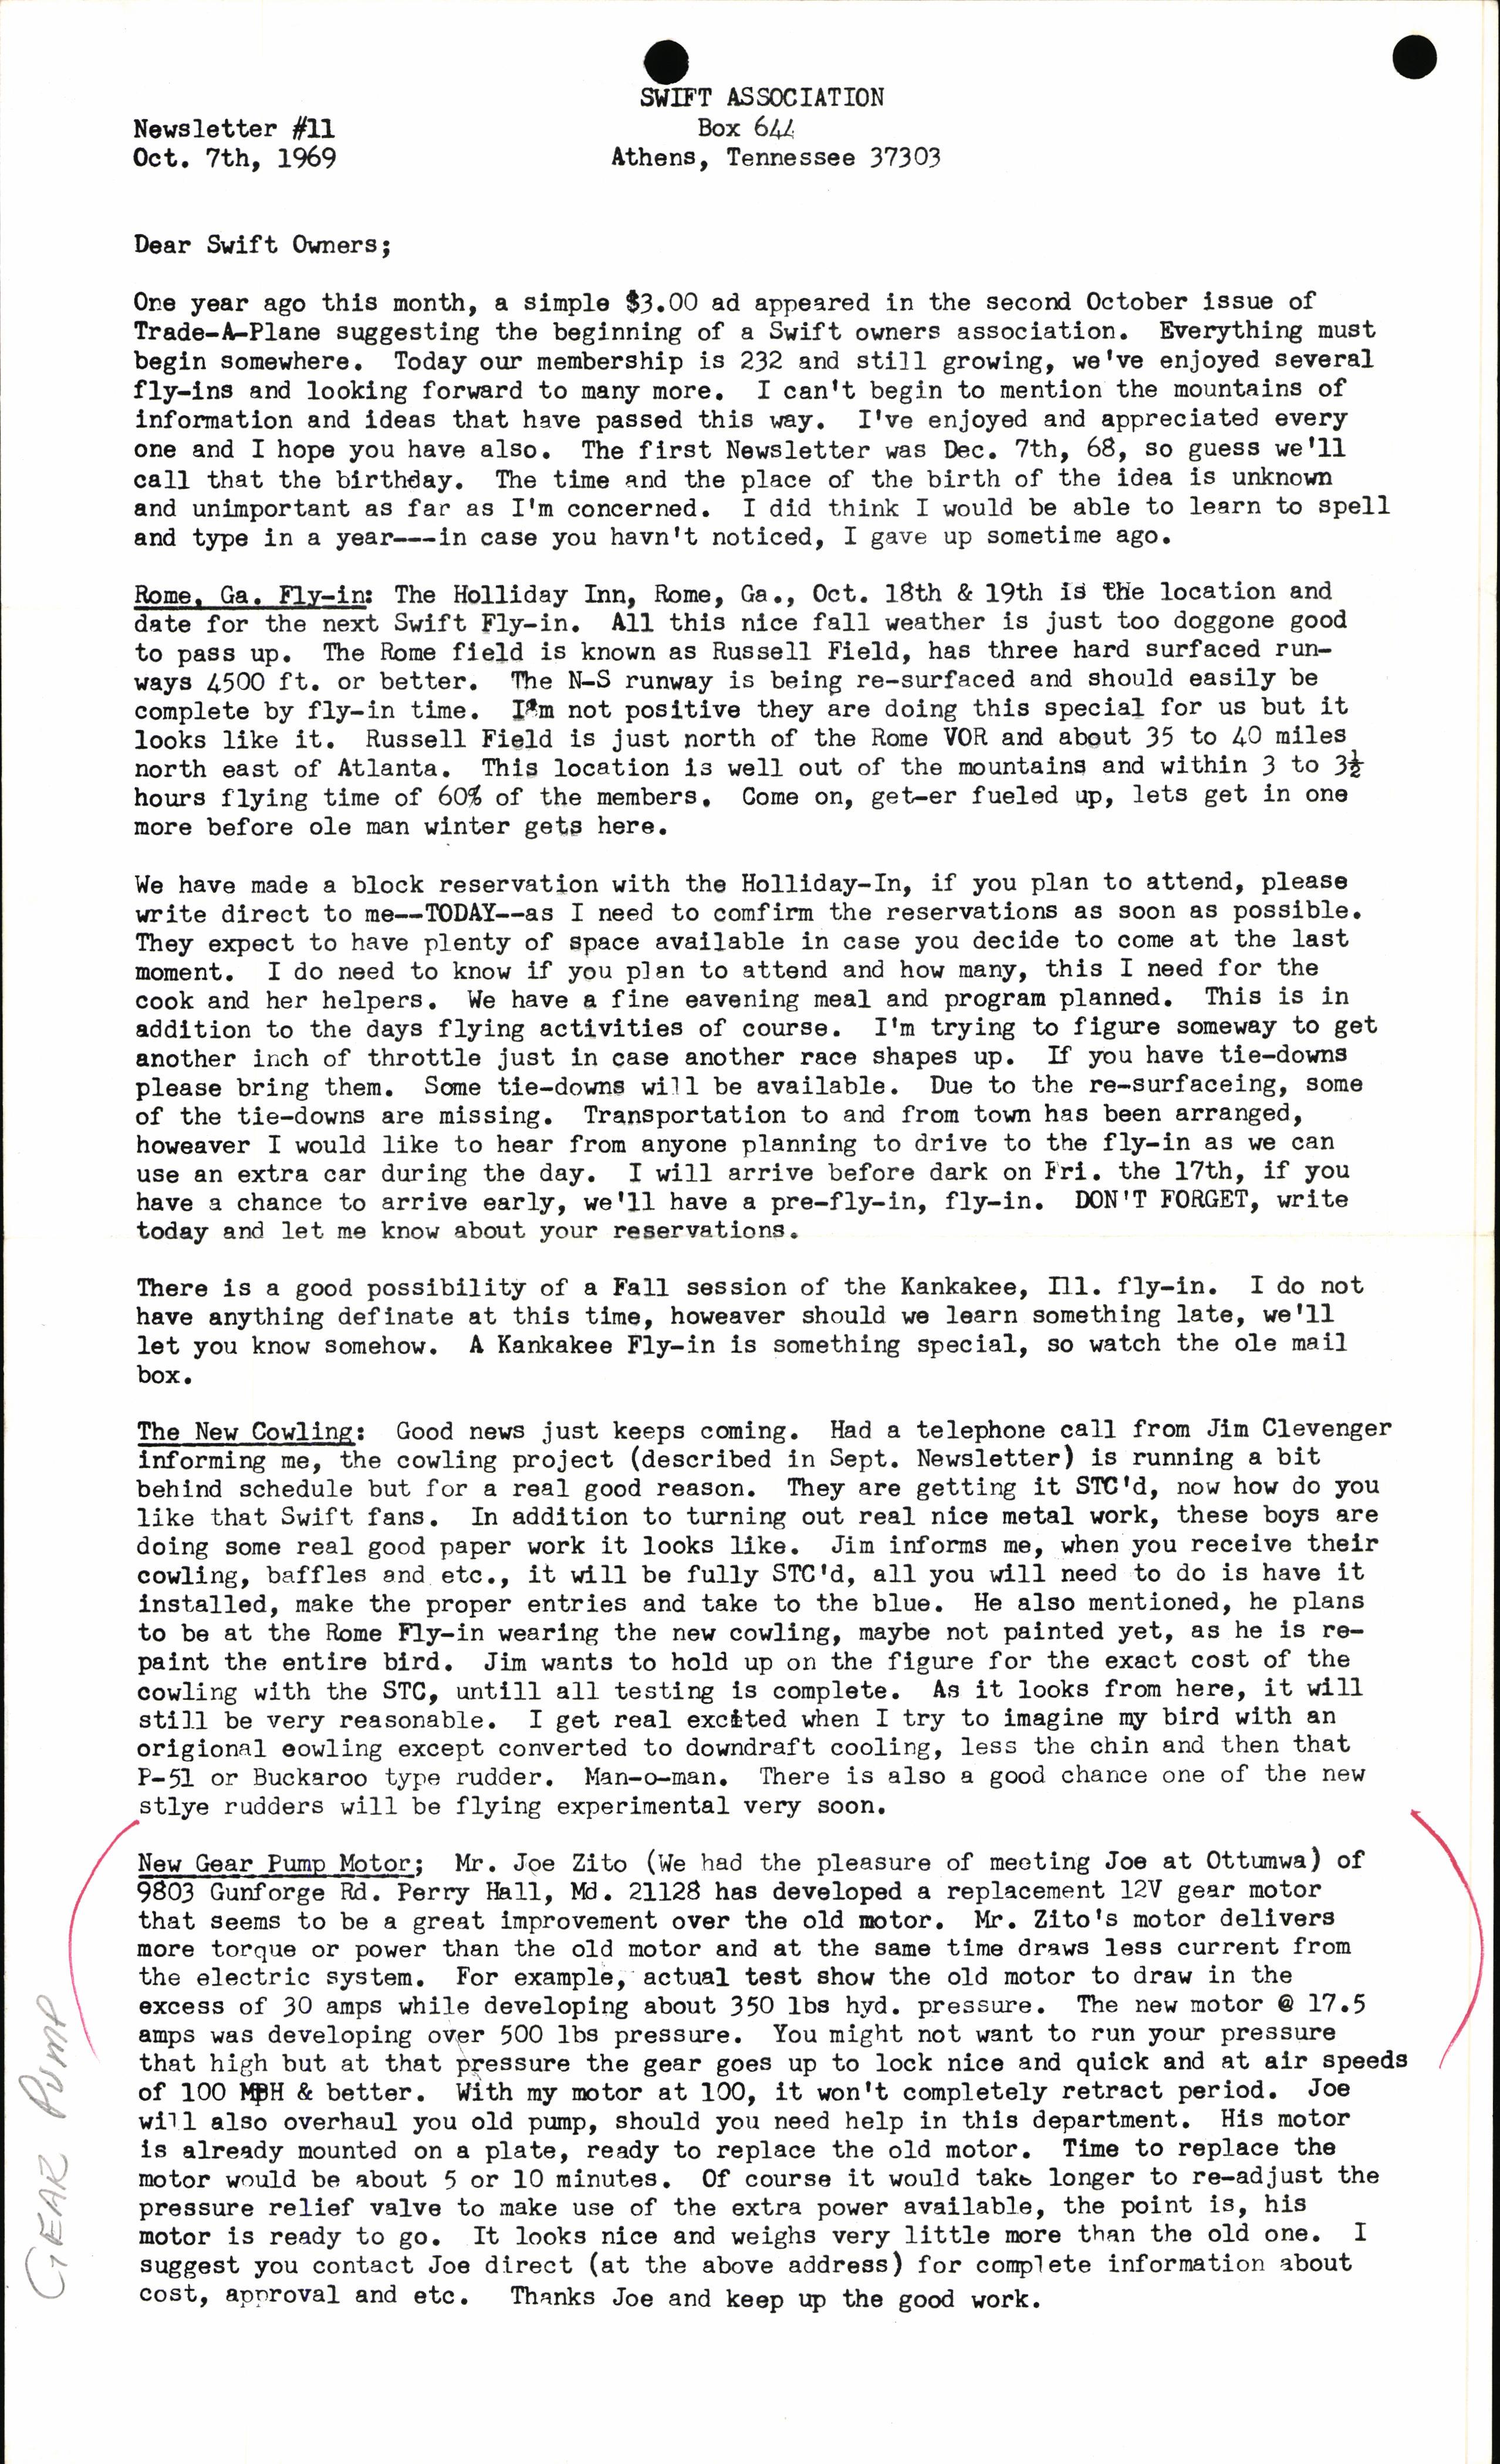 Sample page 1 from AirCorps Library document: October 1969